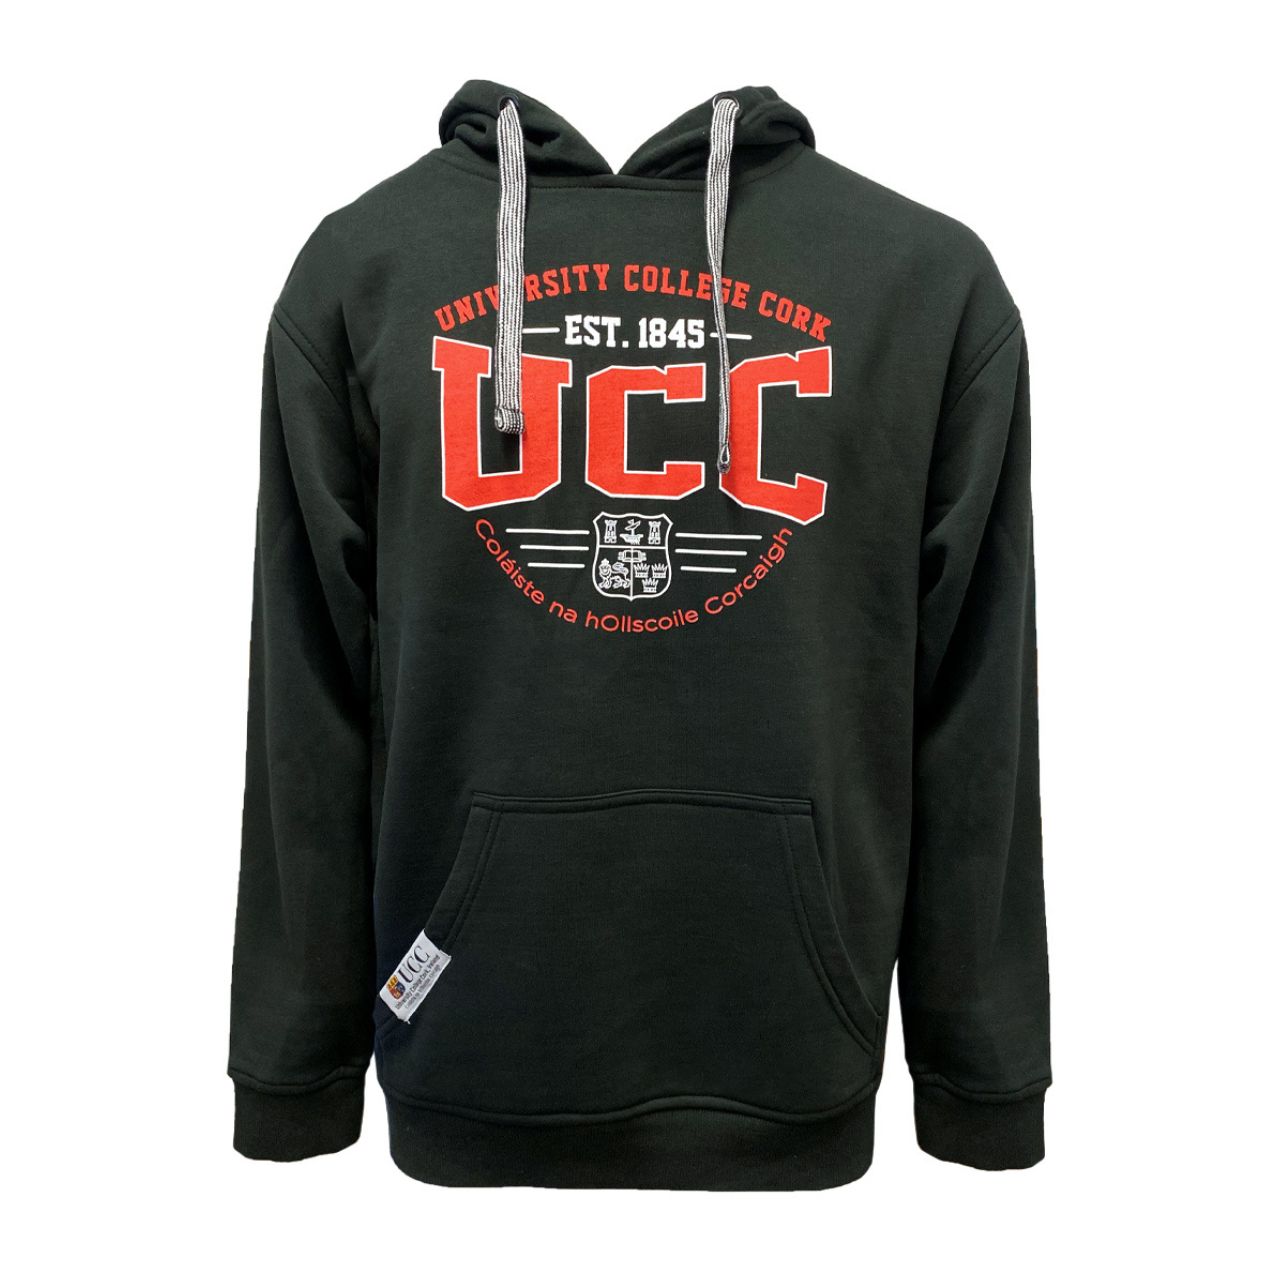 This UCC College Hoodie Est 1845 - Black is an official addition to the collection. Its relaxed fit showcases a printed UCC crest, UCC back neck label, contrasting draw strings, and a pocket with a UCC woven label.